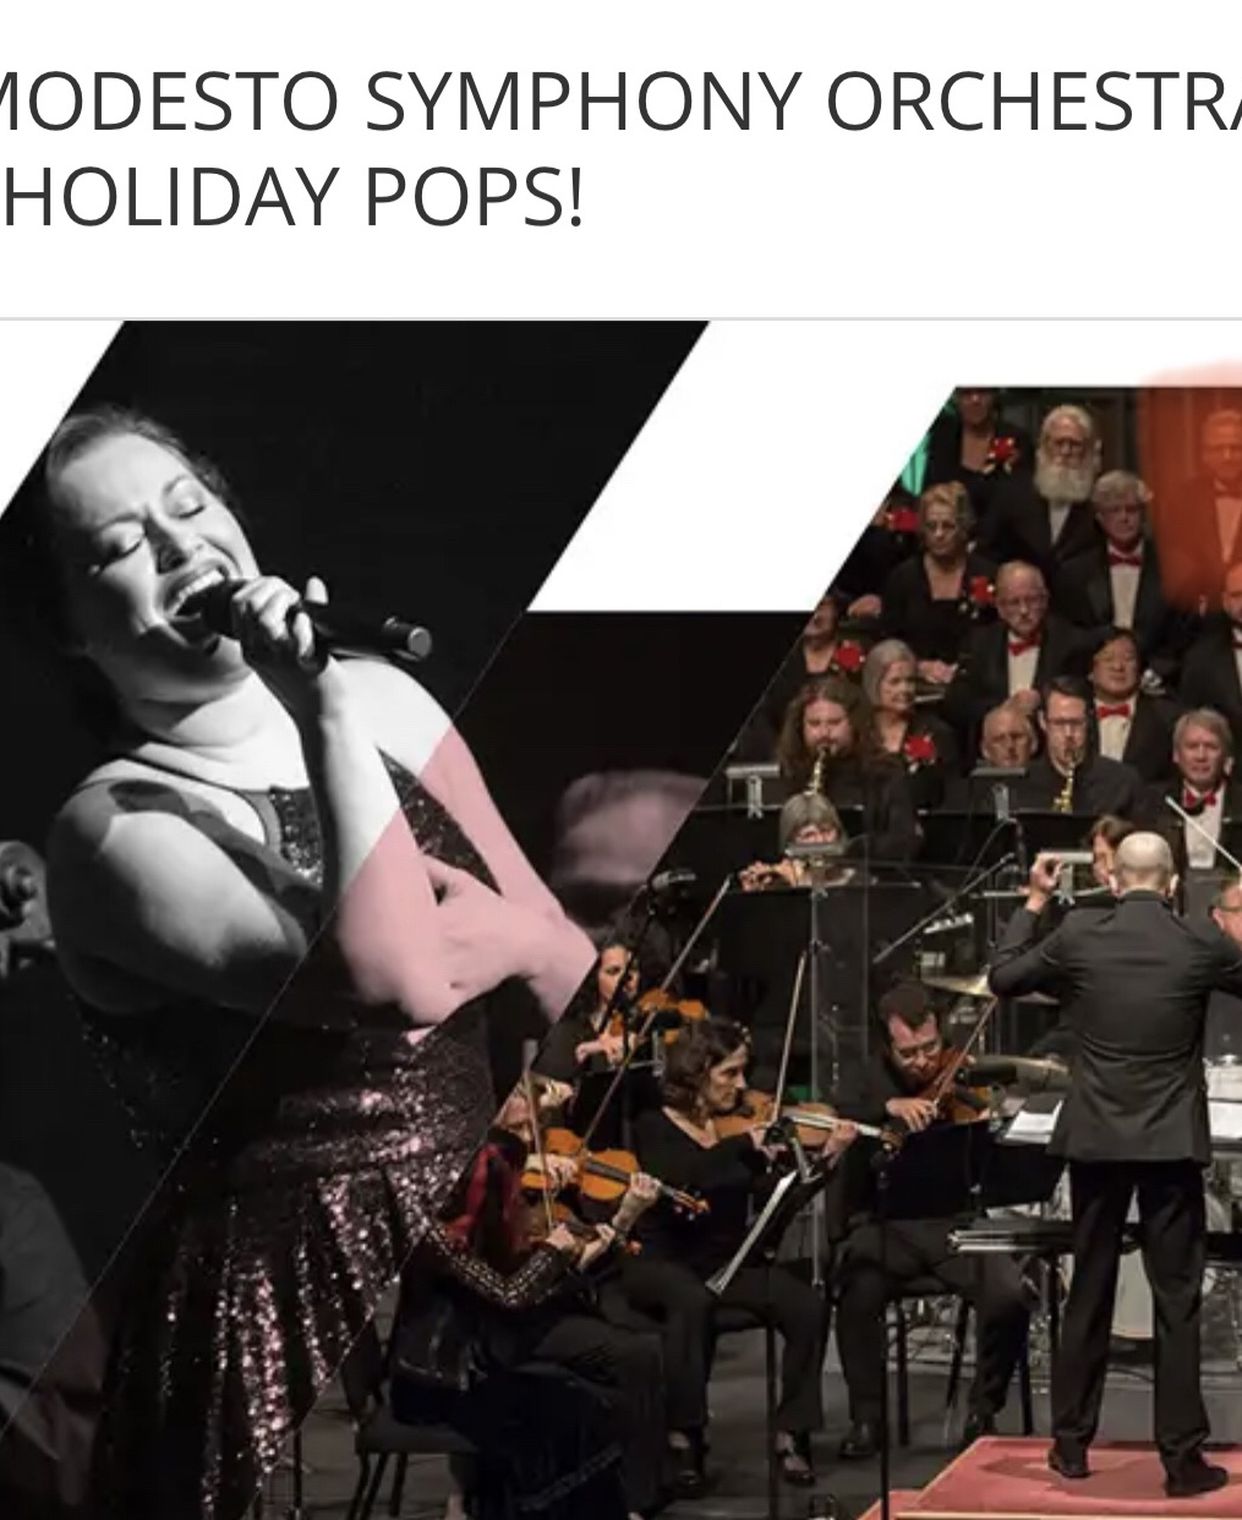 4 Tickets 5th Row Holiday Pops Modesto Symphony Orchestra Today At 2PM 